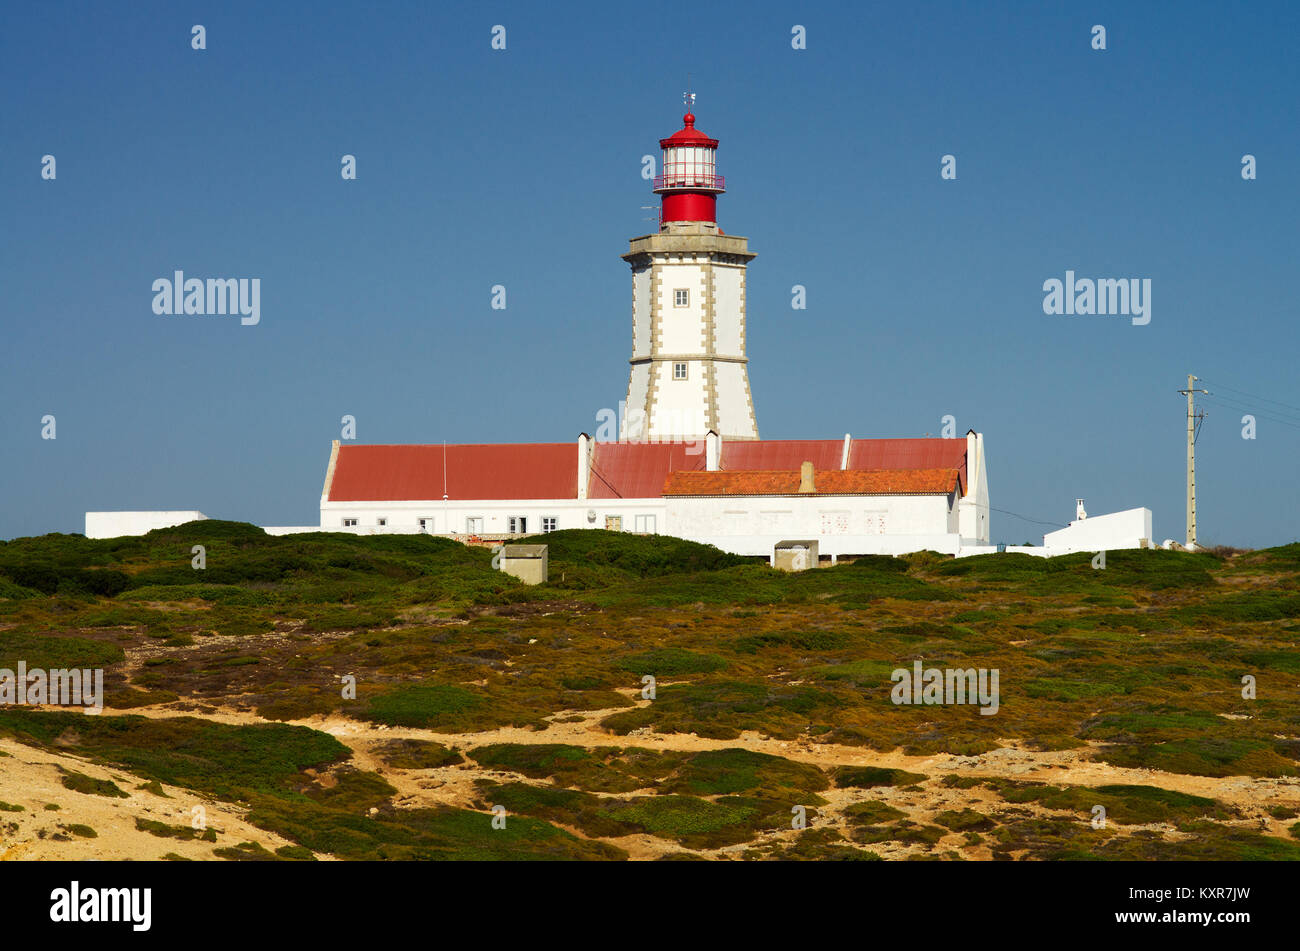 Cape Espichel lighthouse as seen from the ocean side. Low vegetation, white walls, and red topped lighthouse tower against a deep blue sky. Sesimbra,  Stock Photo